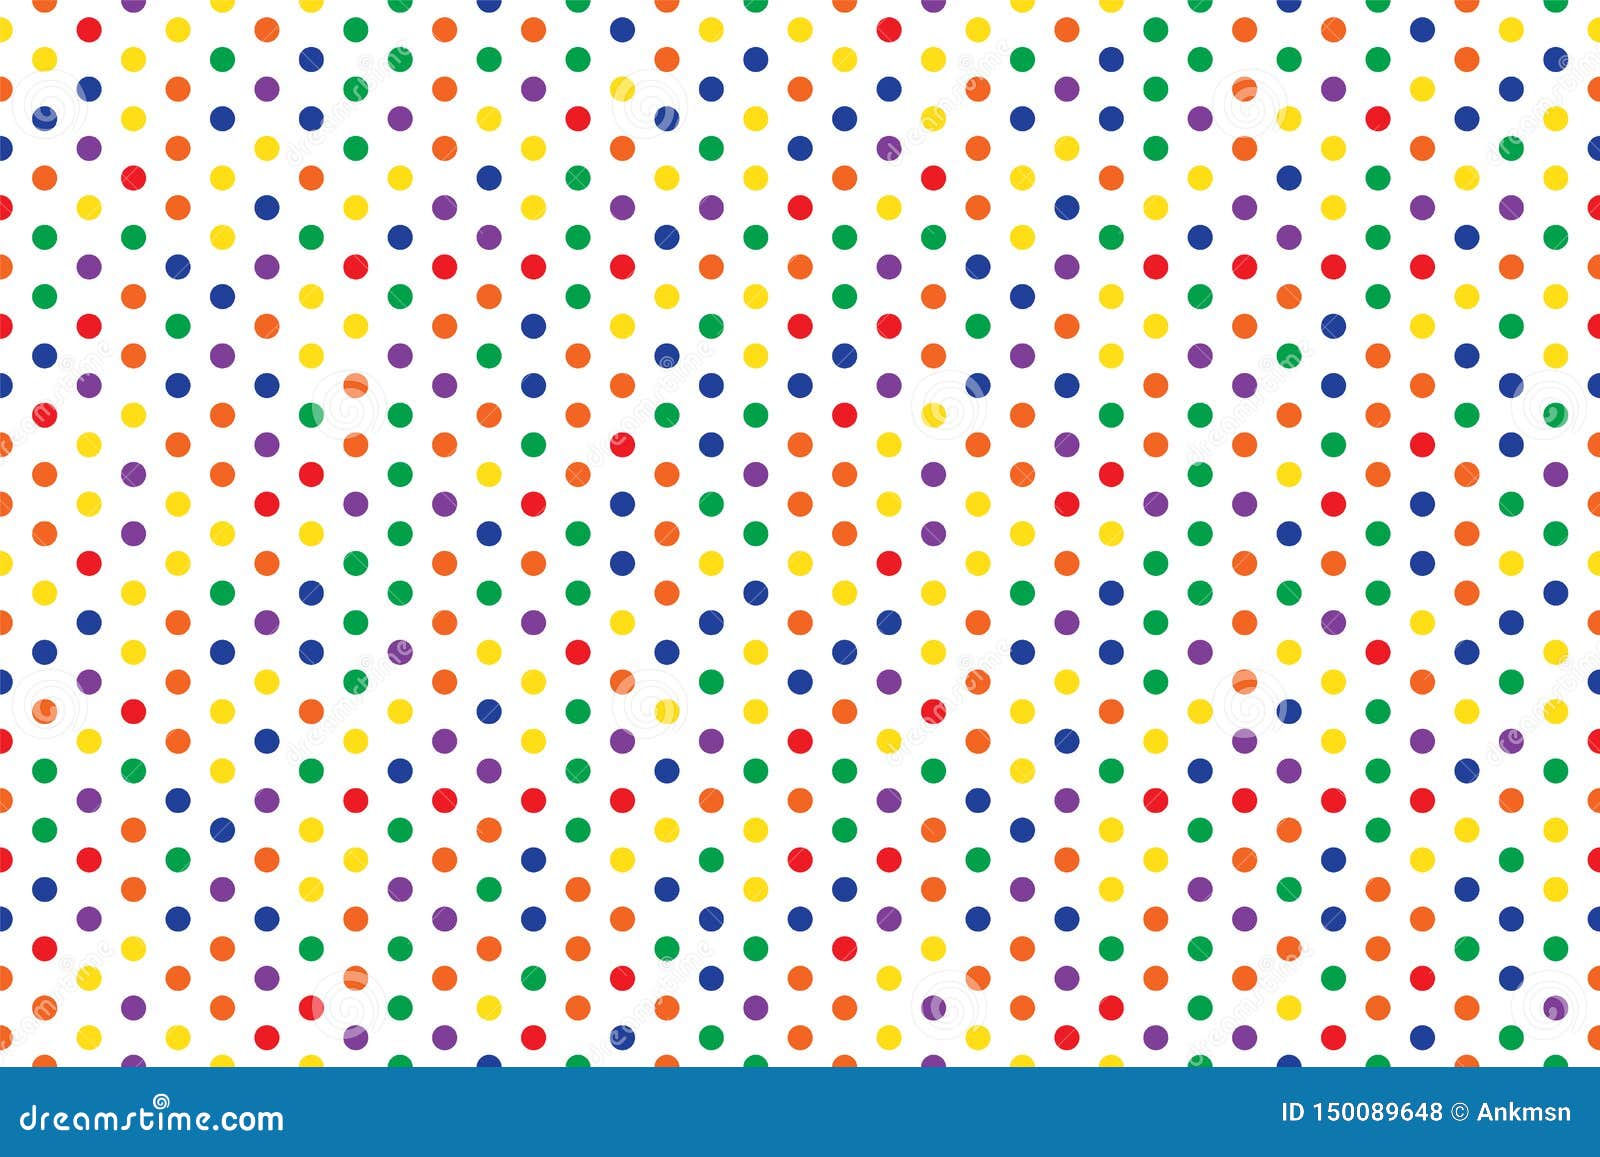 Circle Pattern Multi Color Seamless Abstract Background Design Stock ...